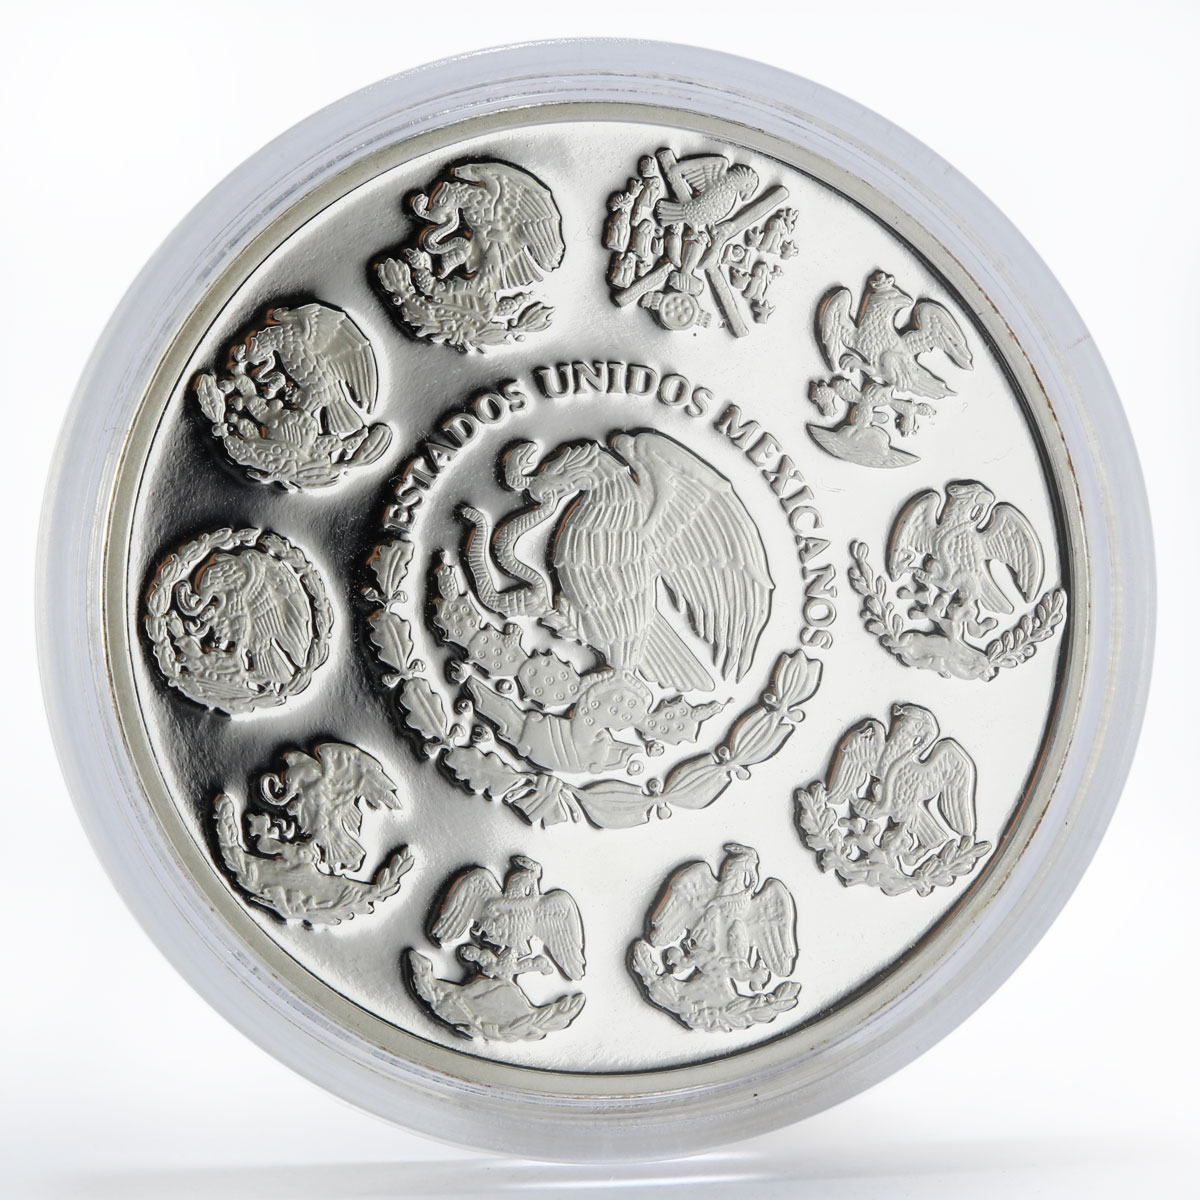 Mexico 5 pesos Millennium series Butterfly proof silver coin 2000